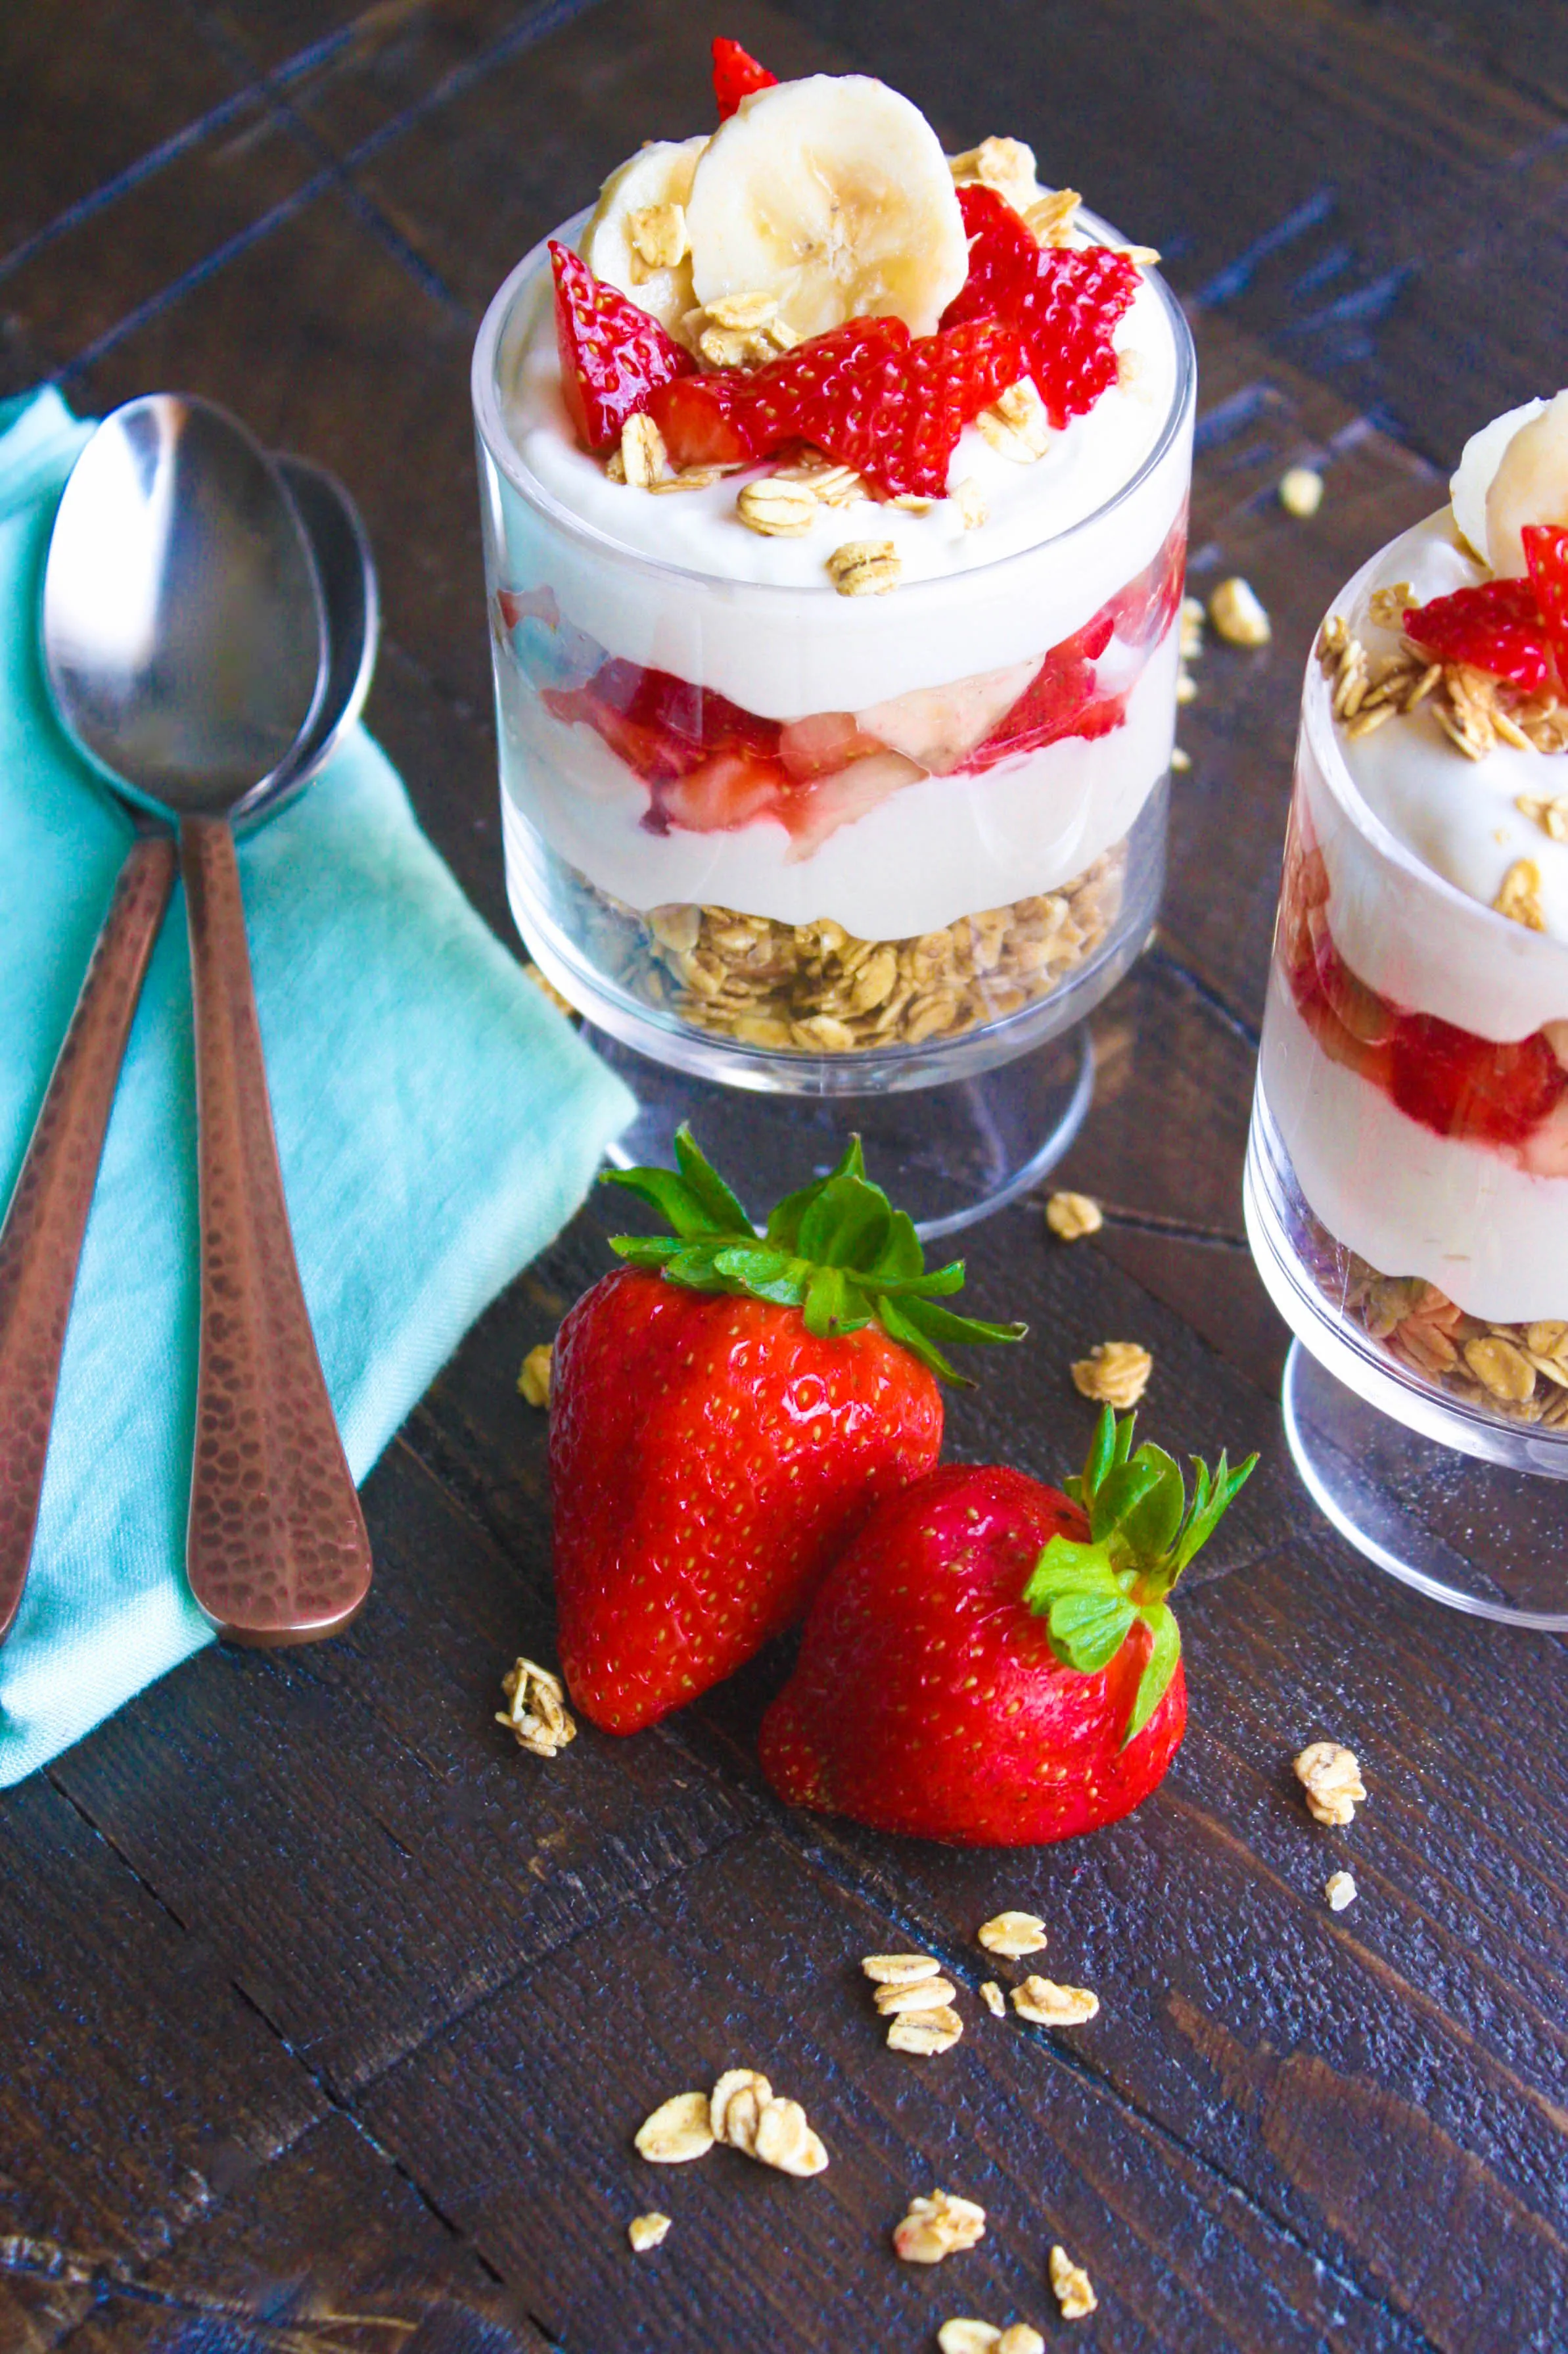 Grab a spoon and dig right in to No Bake Strawberry-Banana Cheesecake Parfaits -- what a great treat! No Bake Strawberry-Banana Cheesecake Parfaits make a lovely, fun dessert!